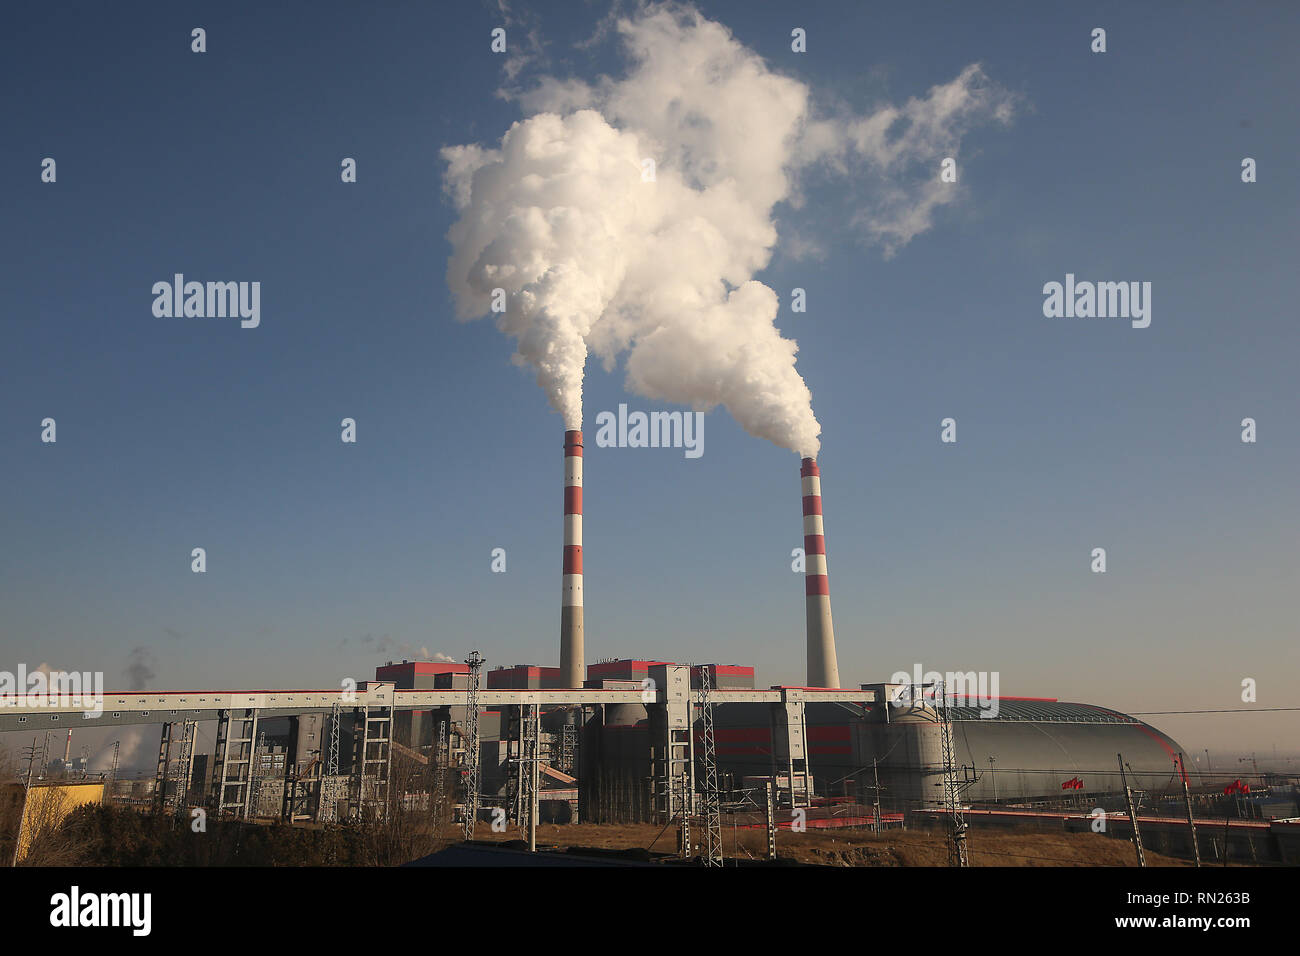 Smoke billows from a coal-powered electric power plant and industrial  facility in Datong, Shanxi Province (China's coal country), on December 12,  2018. China is the largest producer and consumer of coal in